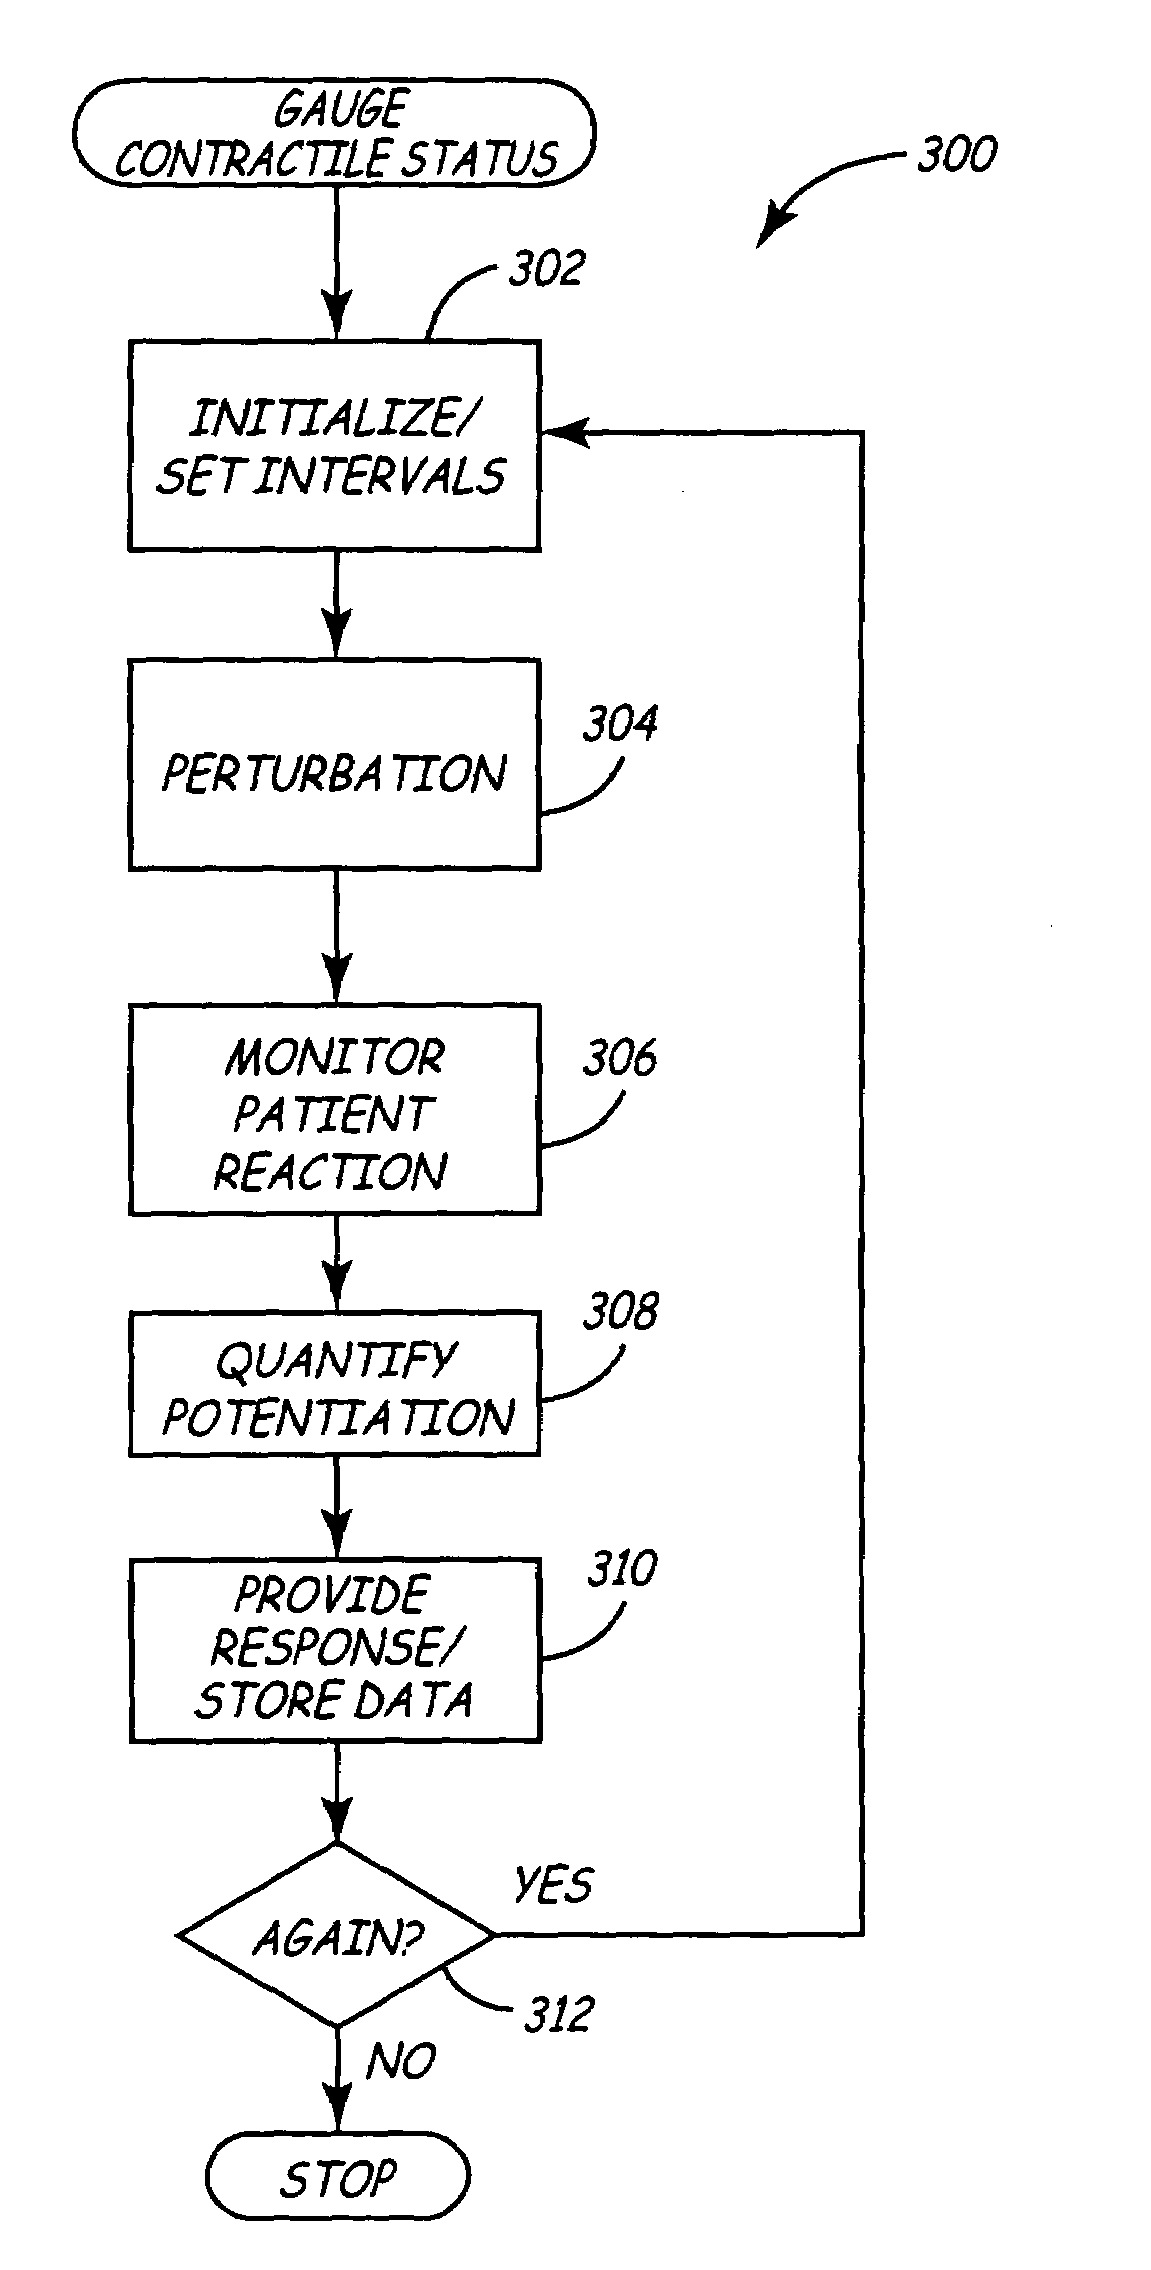 Method and apparatus for improving ventricular status using the force interval relationship